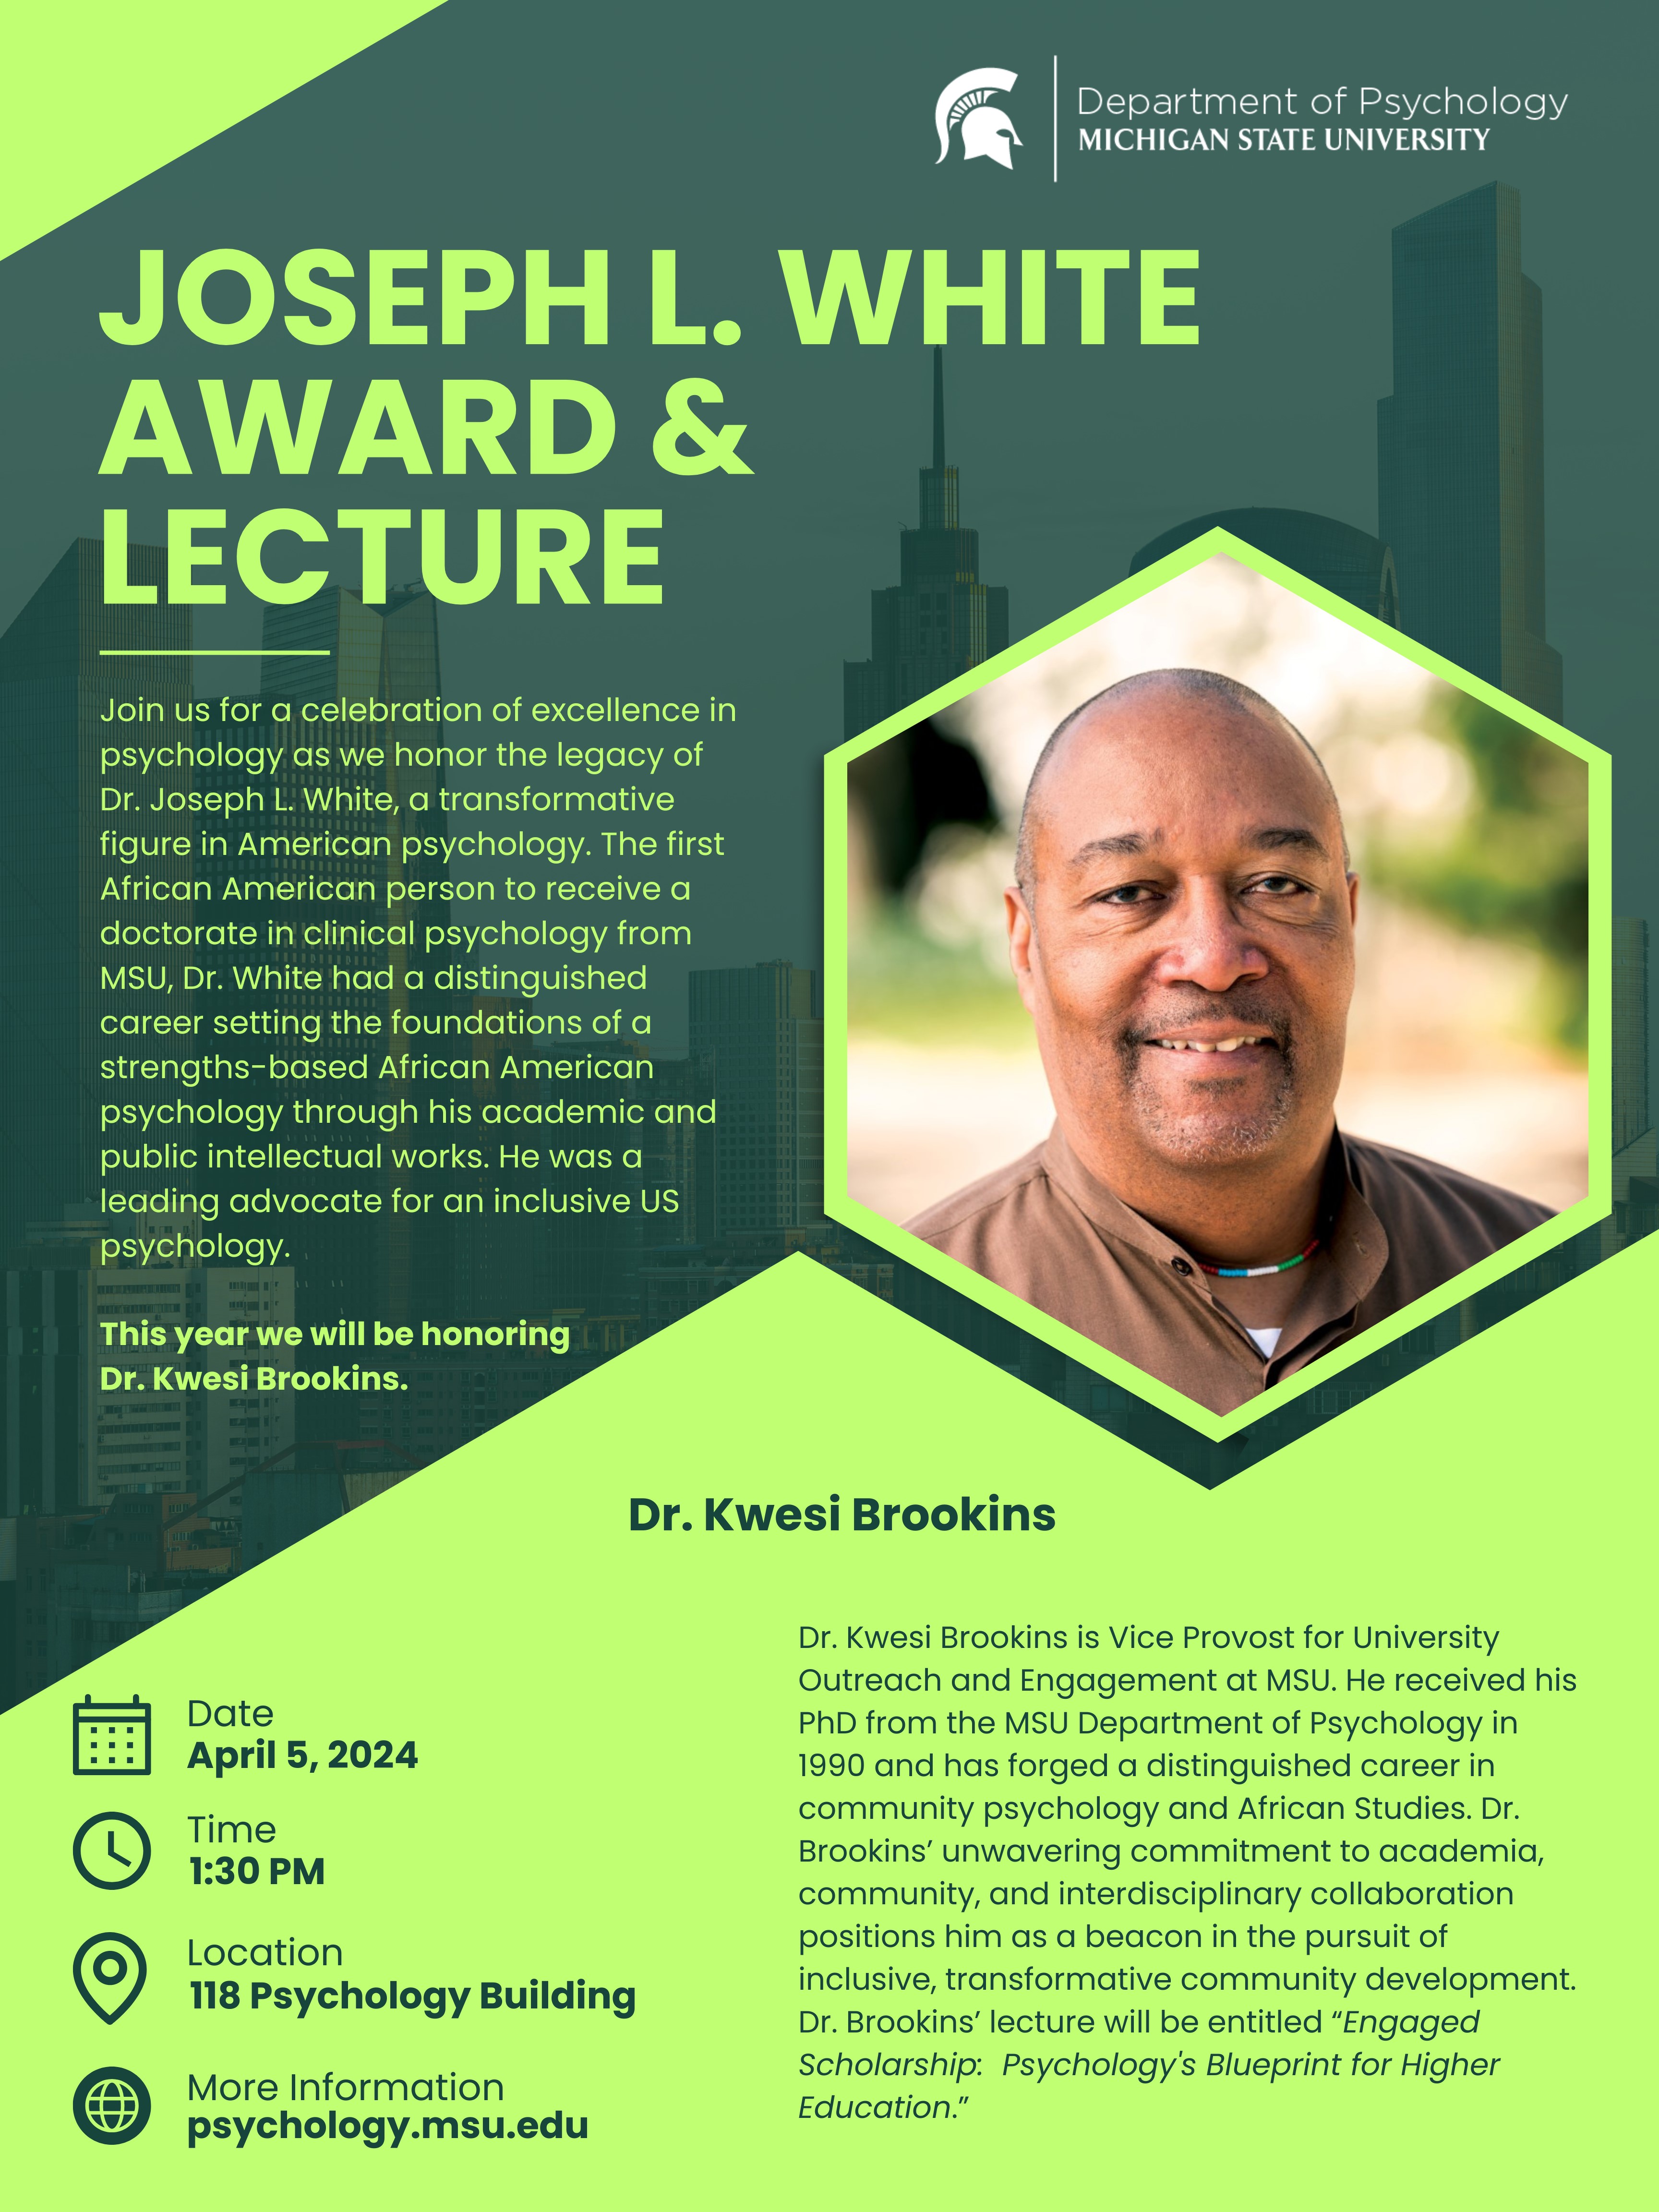 A graphic that says: Join us for a celebration of excellence in psychology as we honor the legacy of Dr. Joseph L. White, a transformative figure in American psychology. This year will be honoring Dr. Kwesi Brookins.